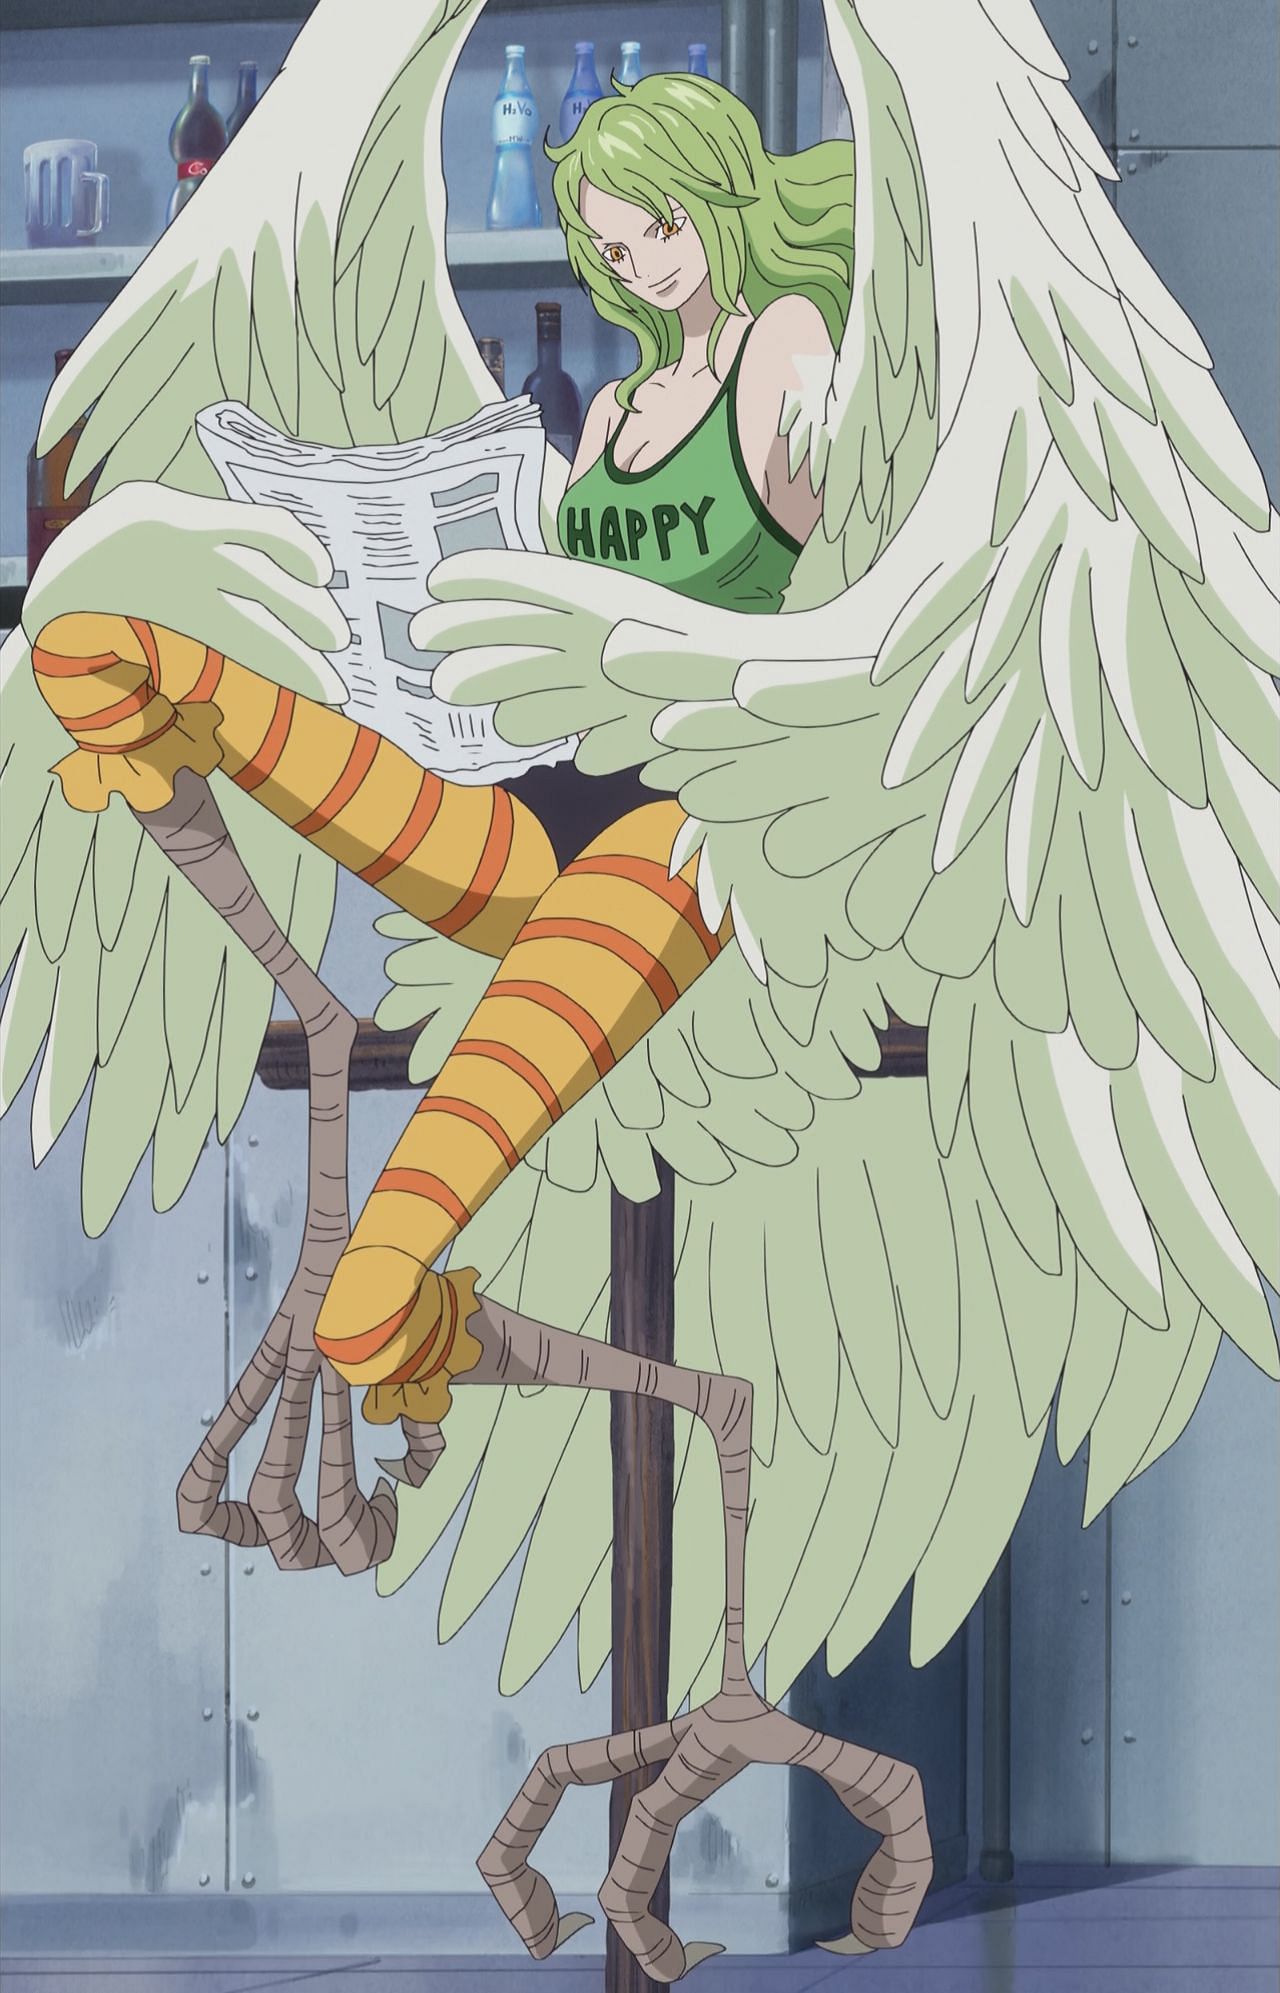 Monet as seen in the One Piece anime (Image via Toei Animation)